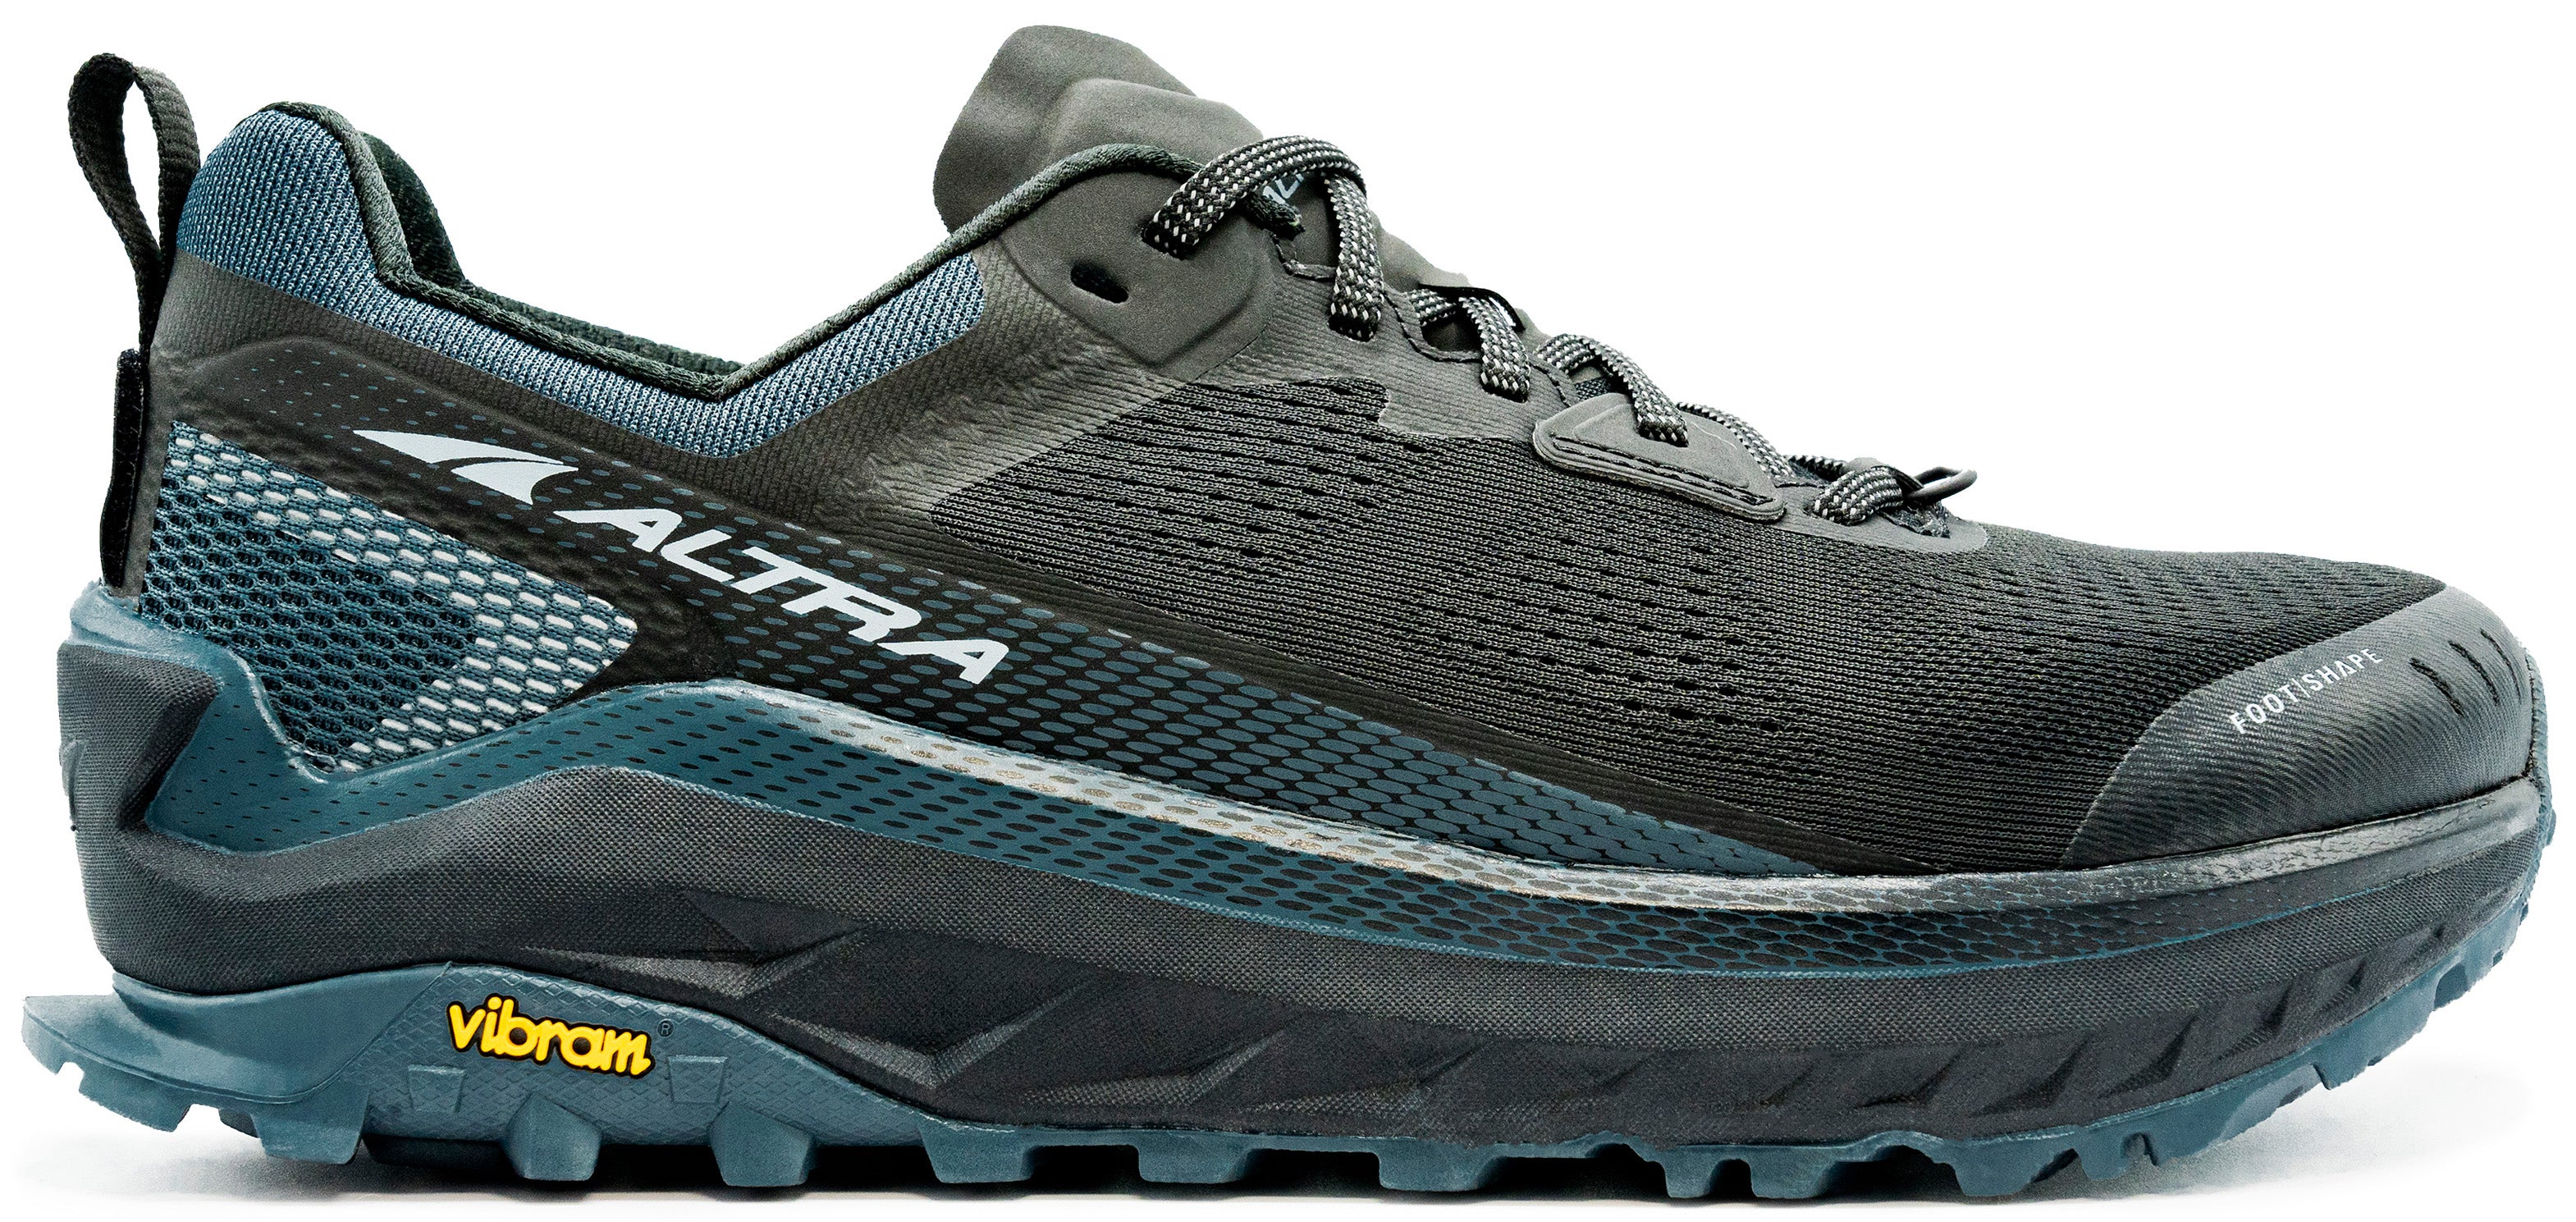 Altra Men's Olympus 4 Trail Running Shoe in Black/Steel from the side